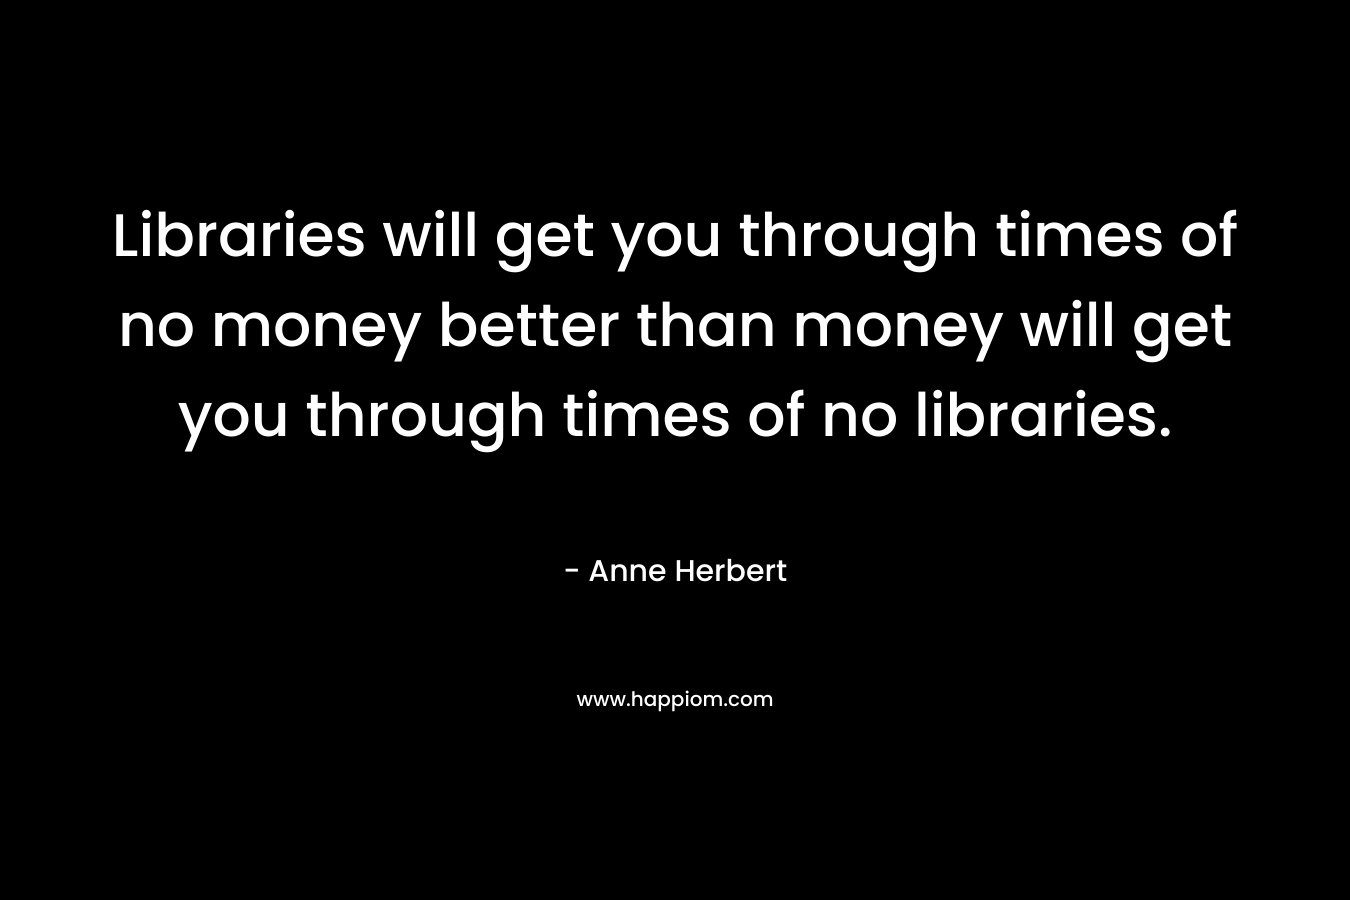 Libraries will get you through times of no money better than money will get you through times of no libraries.